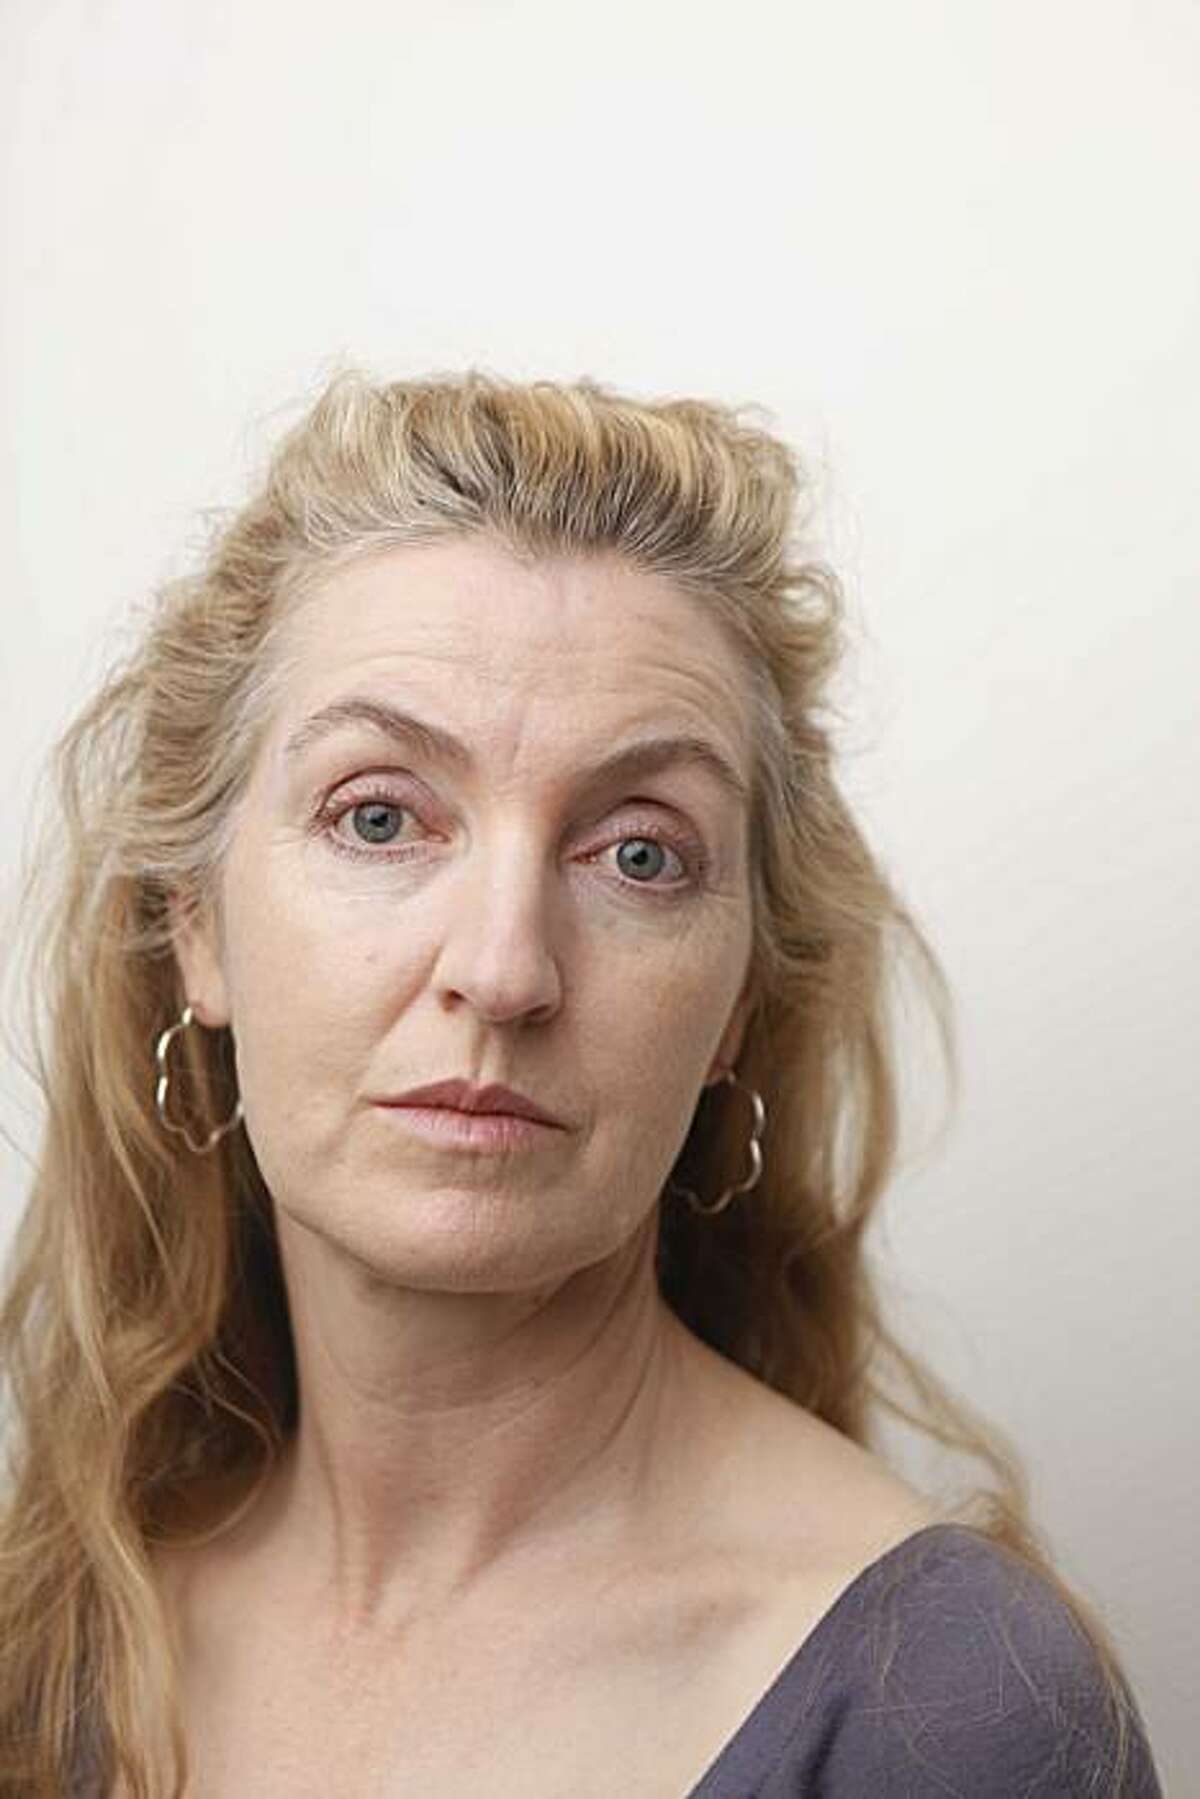 SF historian and Author Rebecca Solnit sits for a portrait in the Chronicle studio on Friday July, 17, 2009 in San Francisco, Calif.